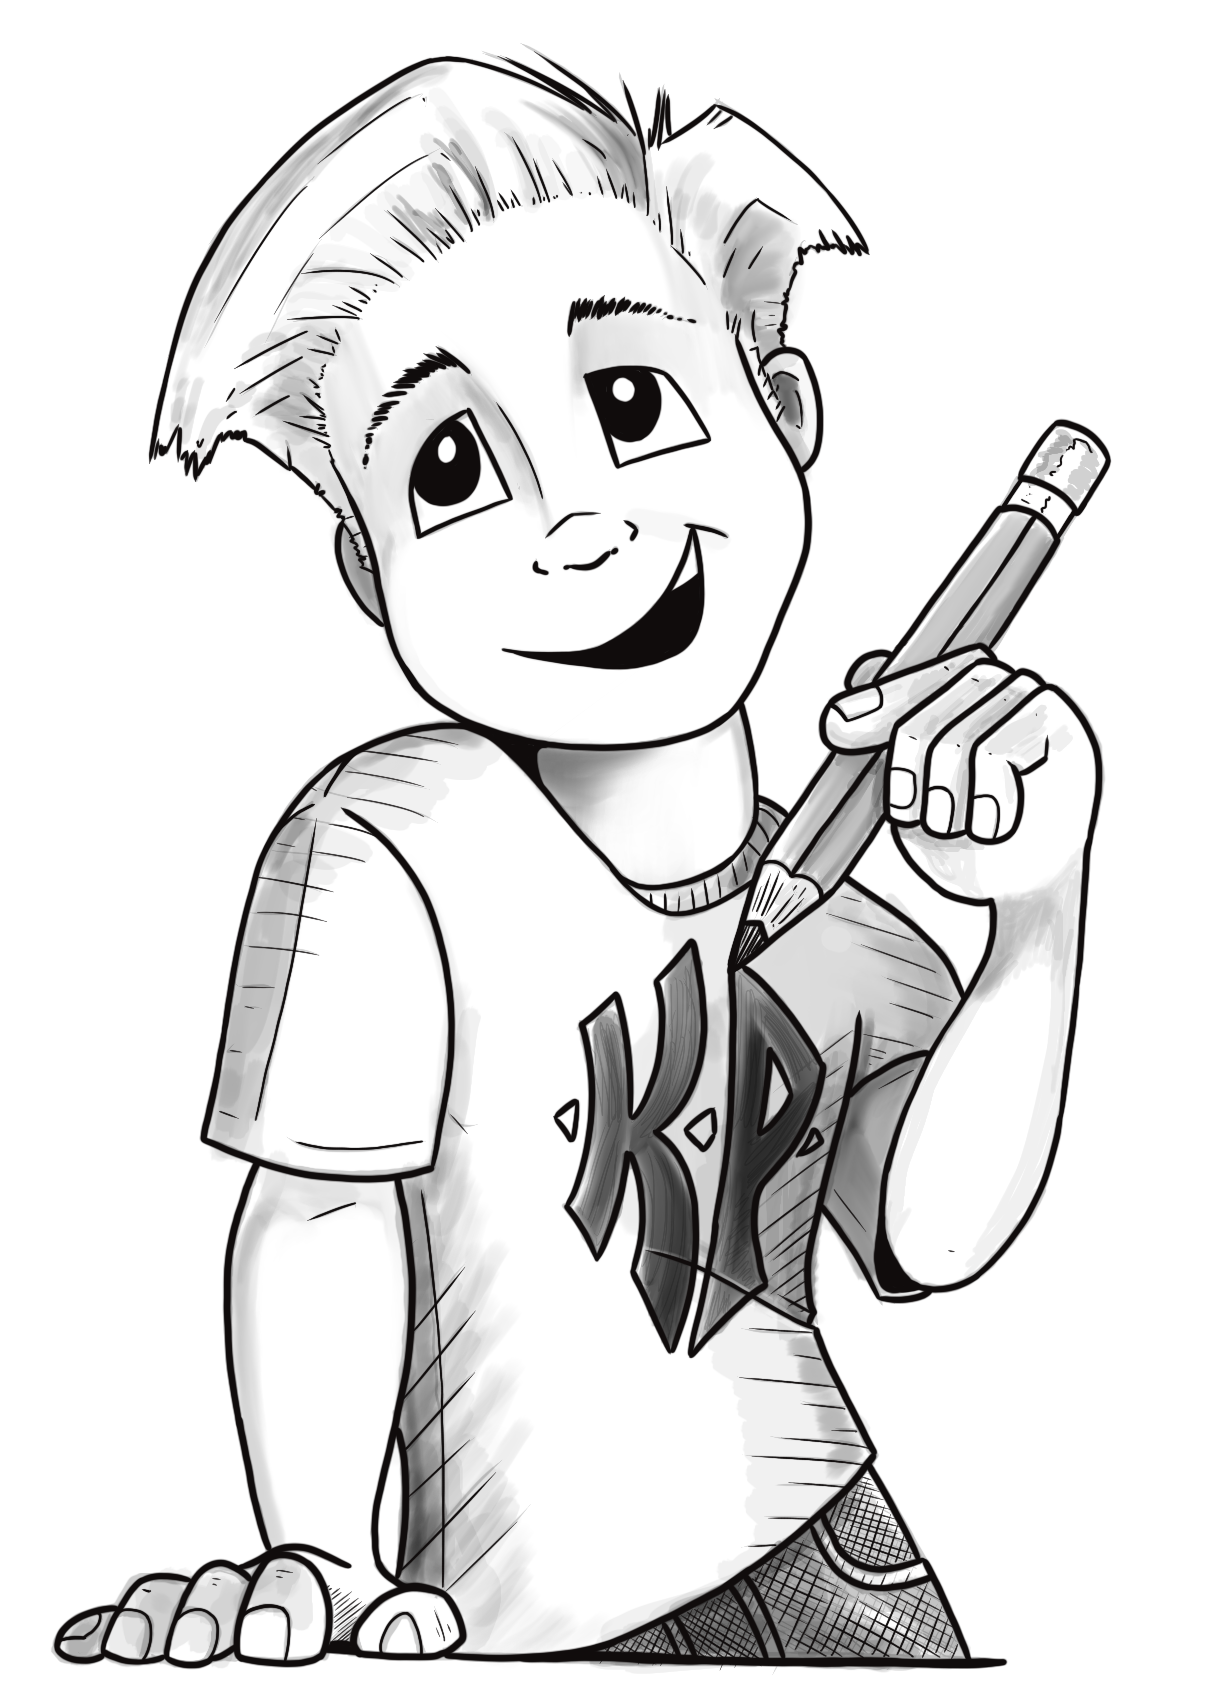 Kevin as a kid, holding a pencil to draw. Wearing a KP t-shirt.